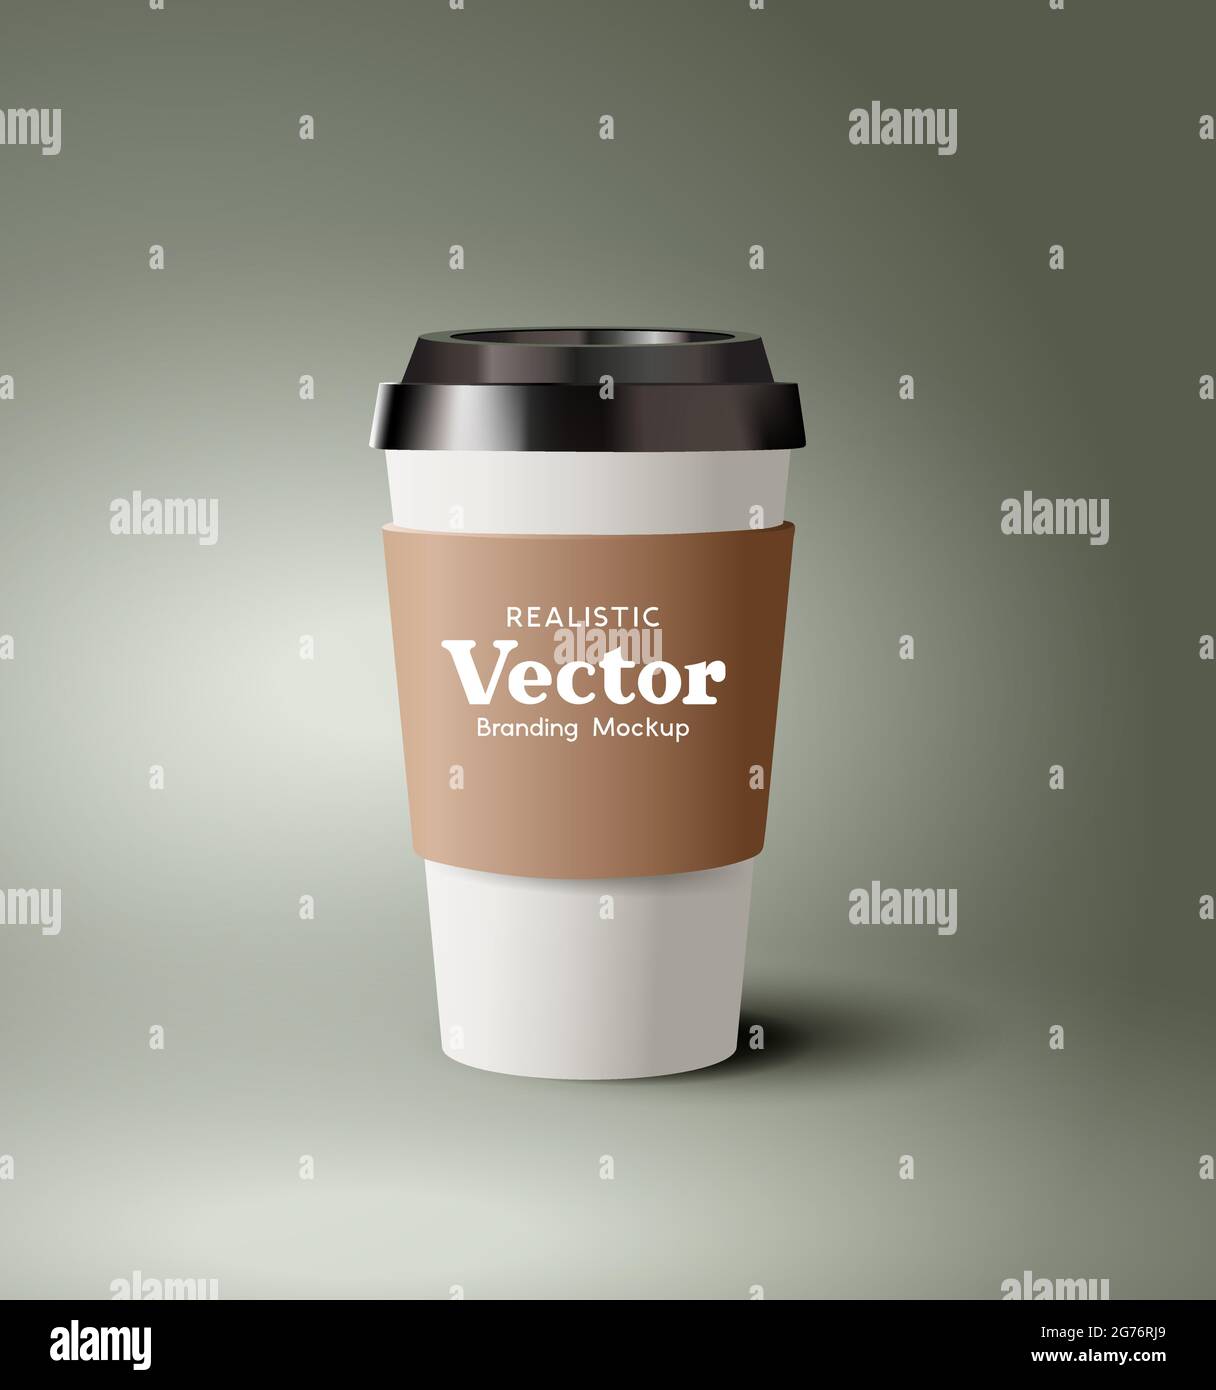 https://c8.alamy.com/comp/2G76RJ9/a-realistic-takeaway-cardboard-coffee-cup-with-plastic-lid-contemporary-beverage-hot-drinks-marketing-template-vector-illustration-2G76RJ9.jpg